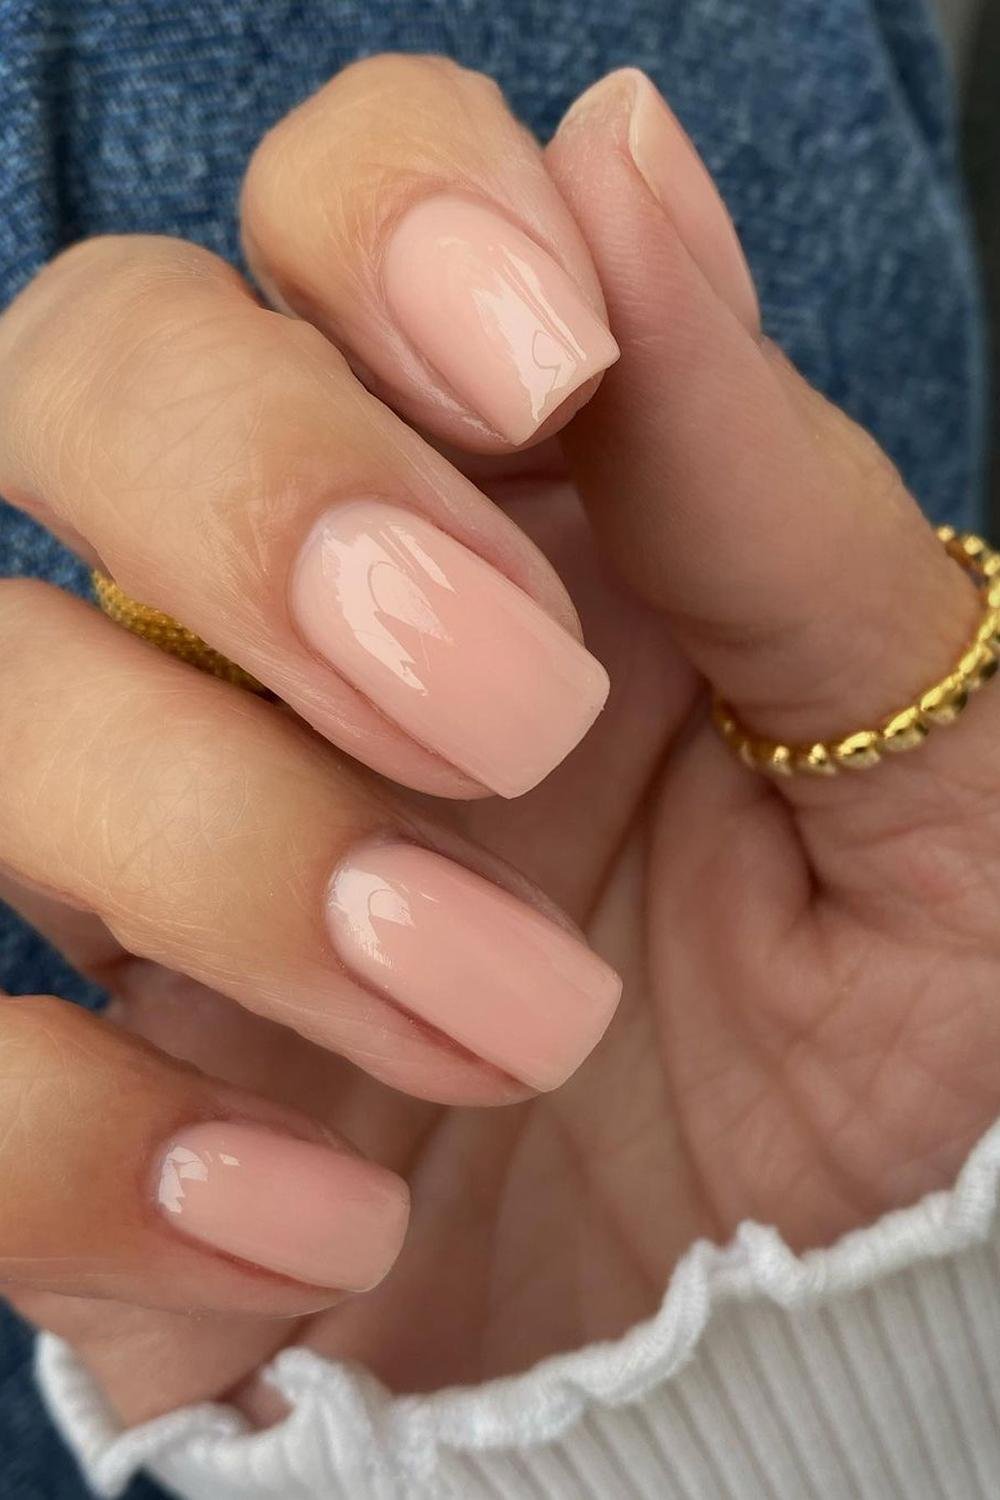 21 - Picture of Nude Nails